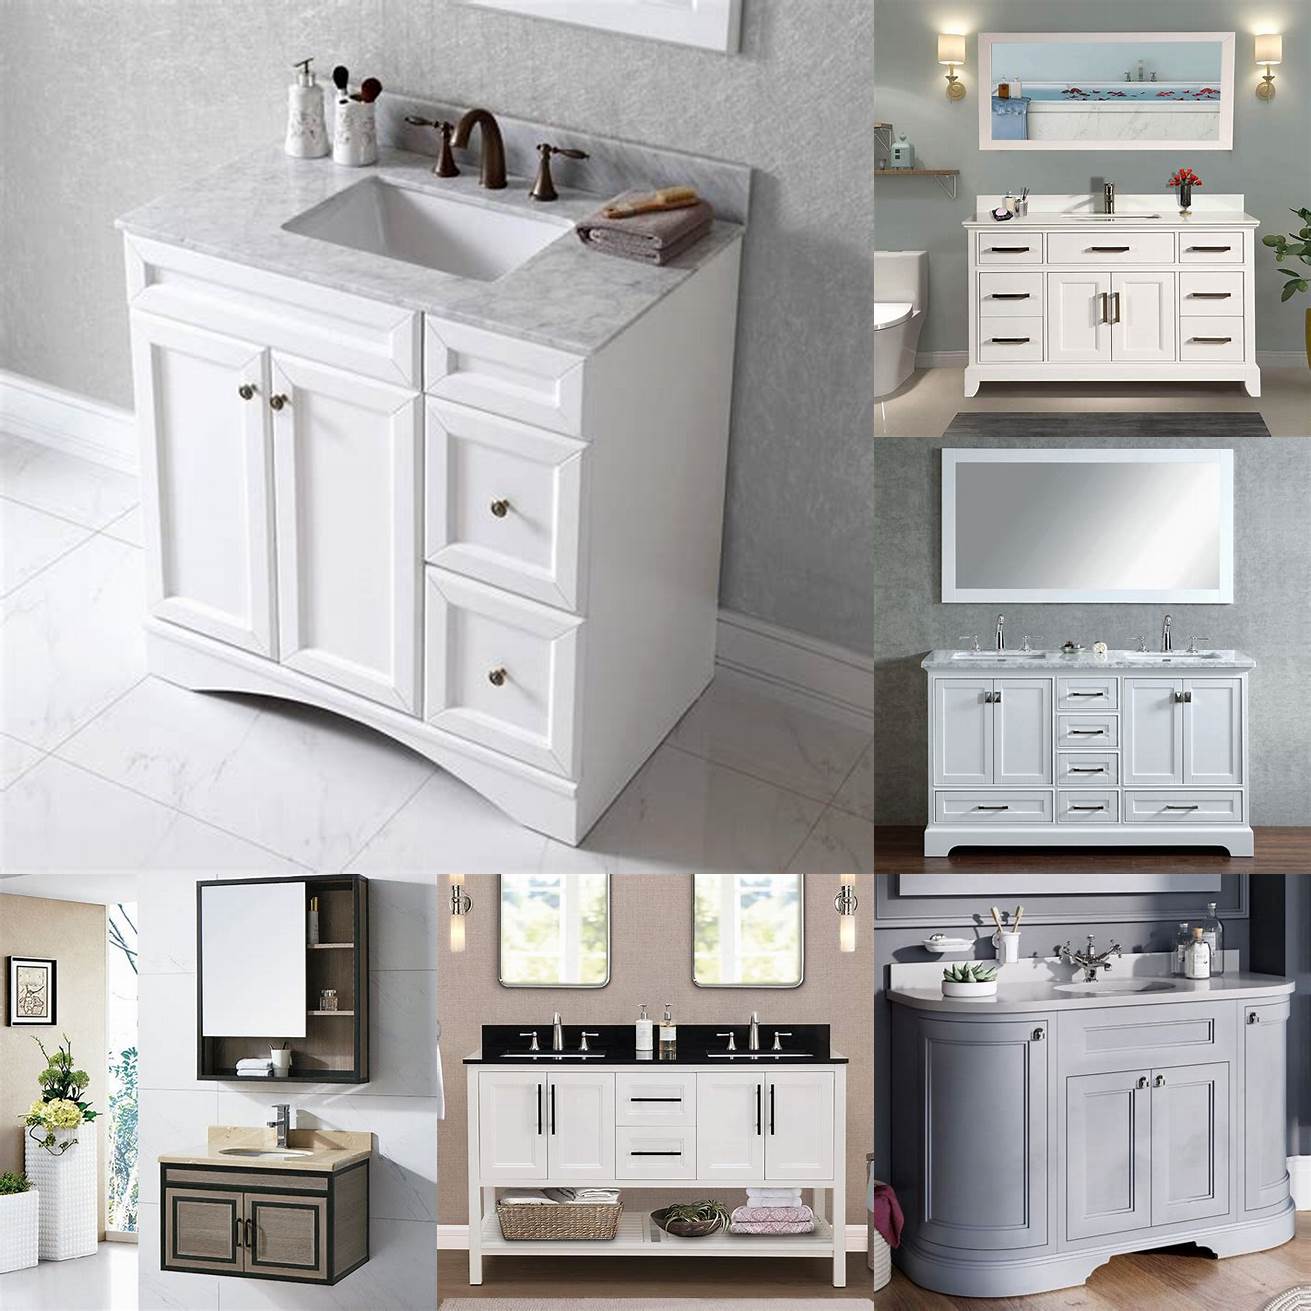 Price Set a budget and choose a vanity that fits within your price range